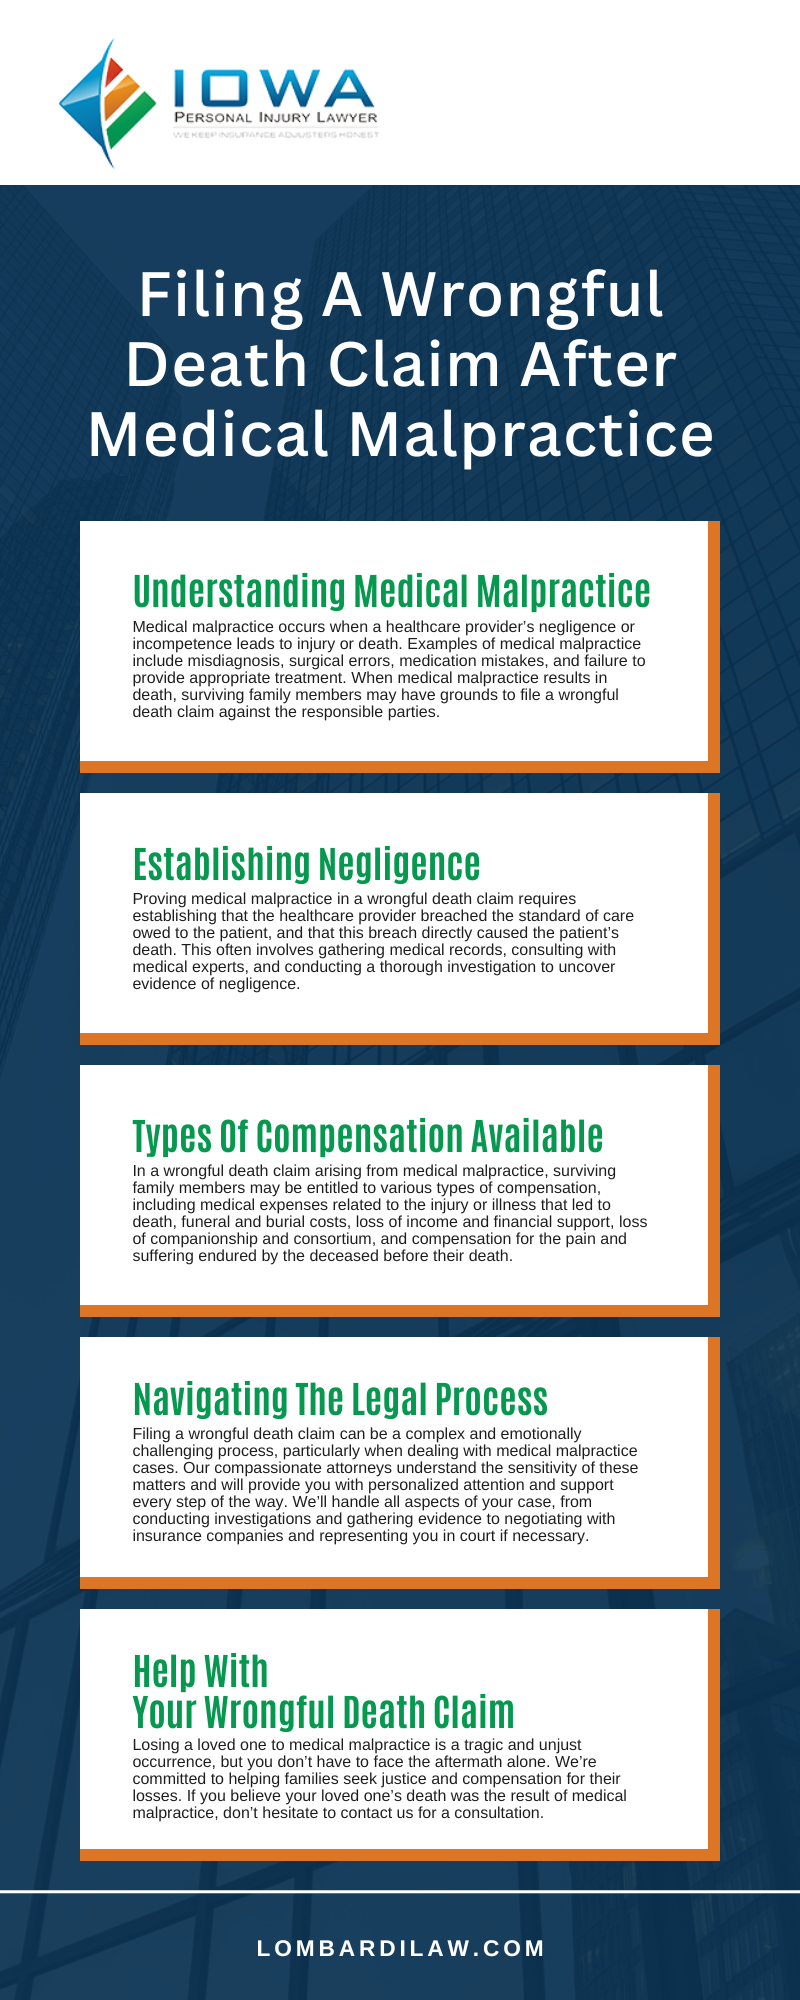 Filing A Wrongful Death Claim After Medical Malpractice Infographic